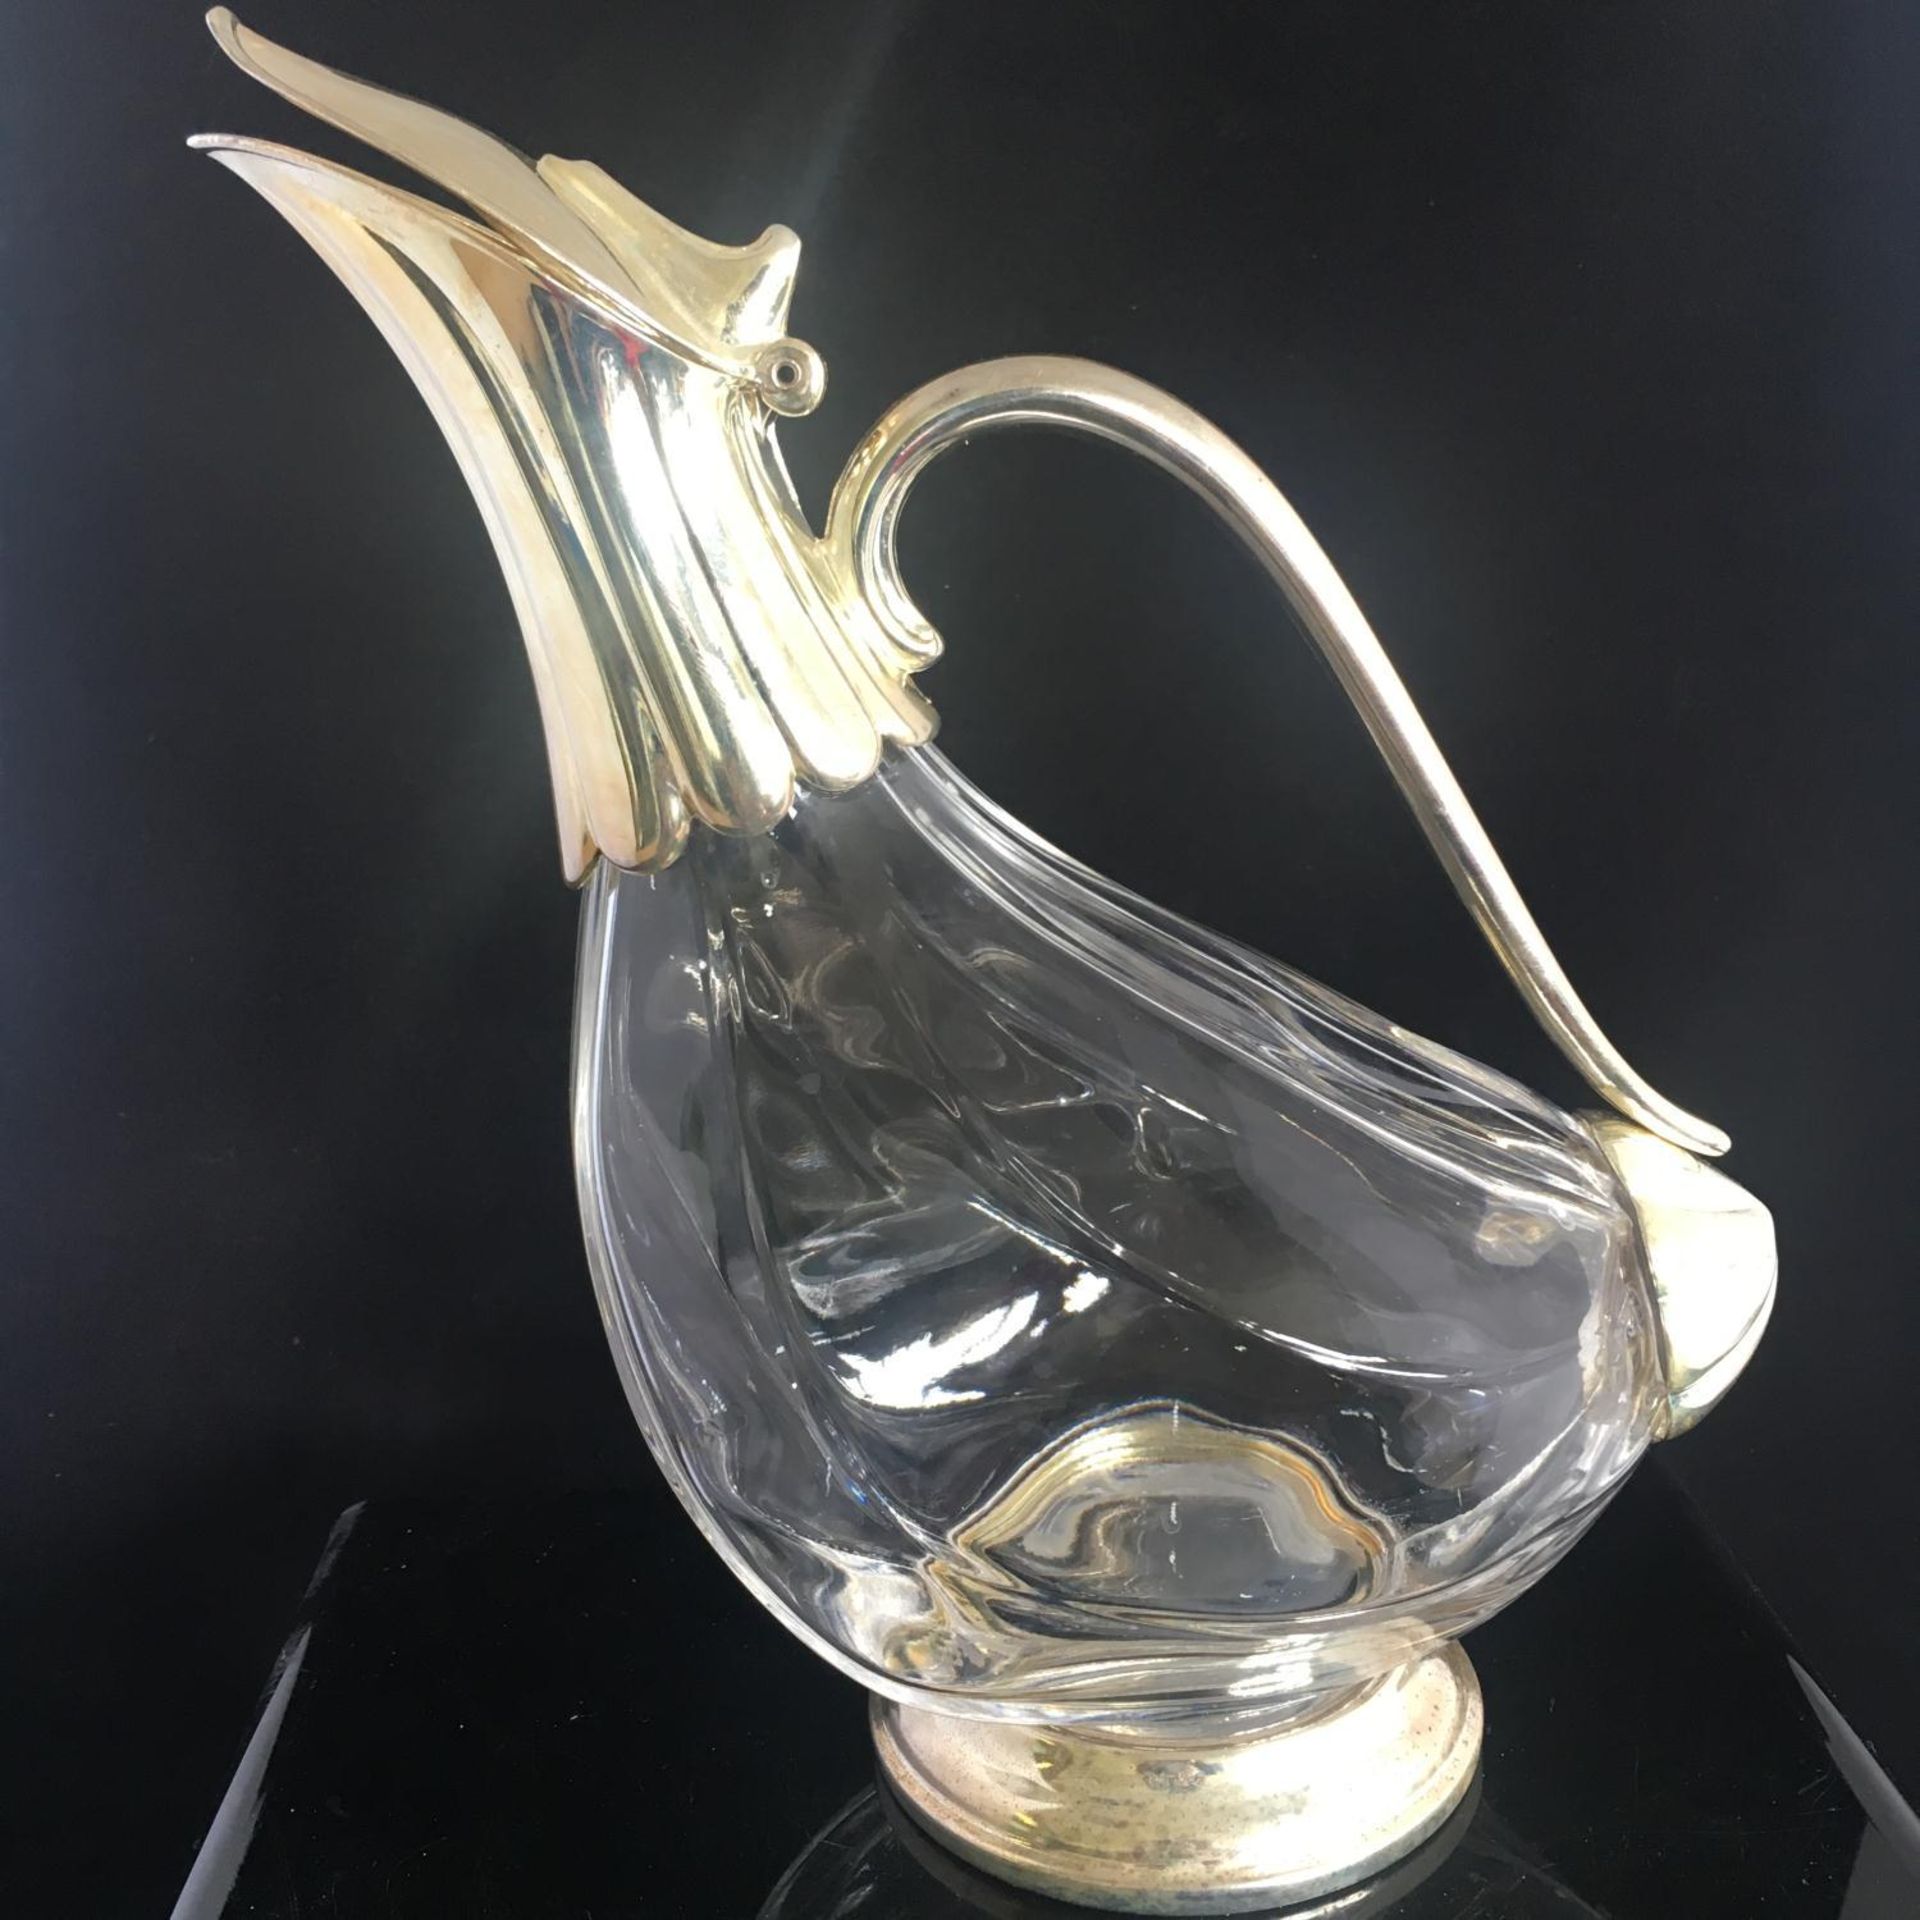 SILVER PLATED AND GLASS DUCK SHAPED WINE DECANTER. In good overall condition with no chips or